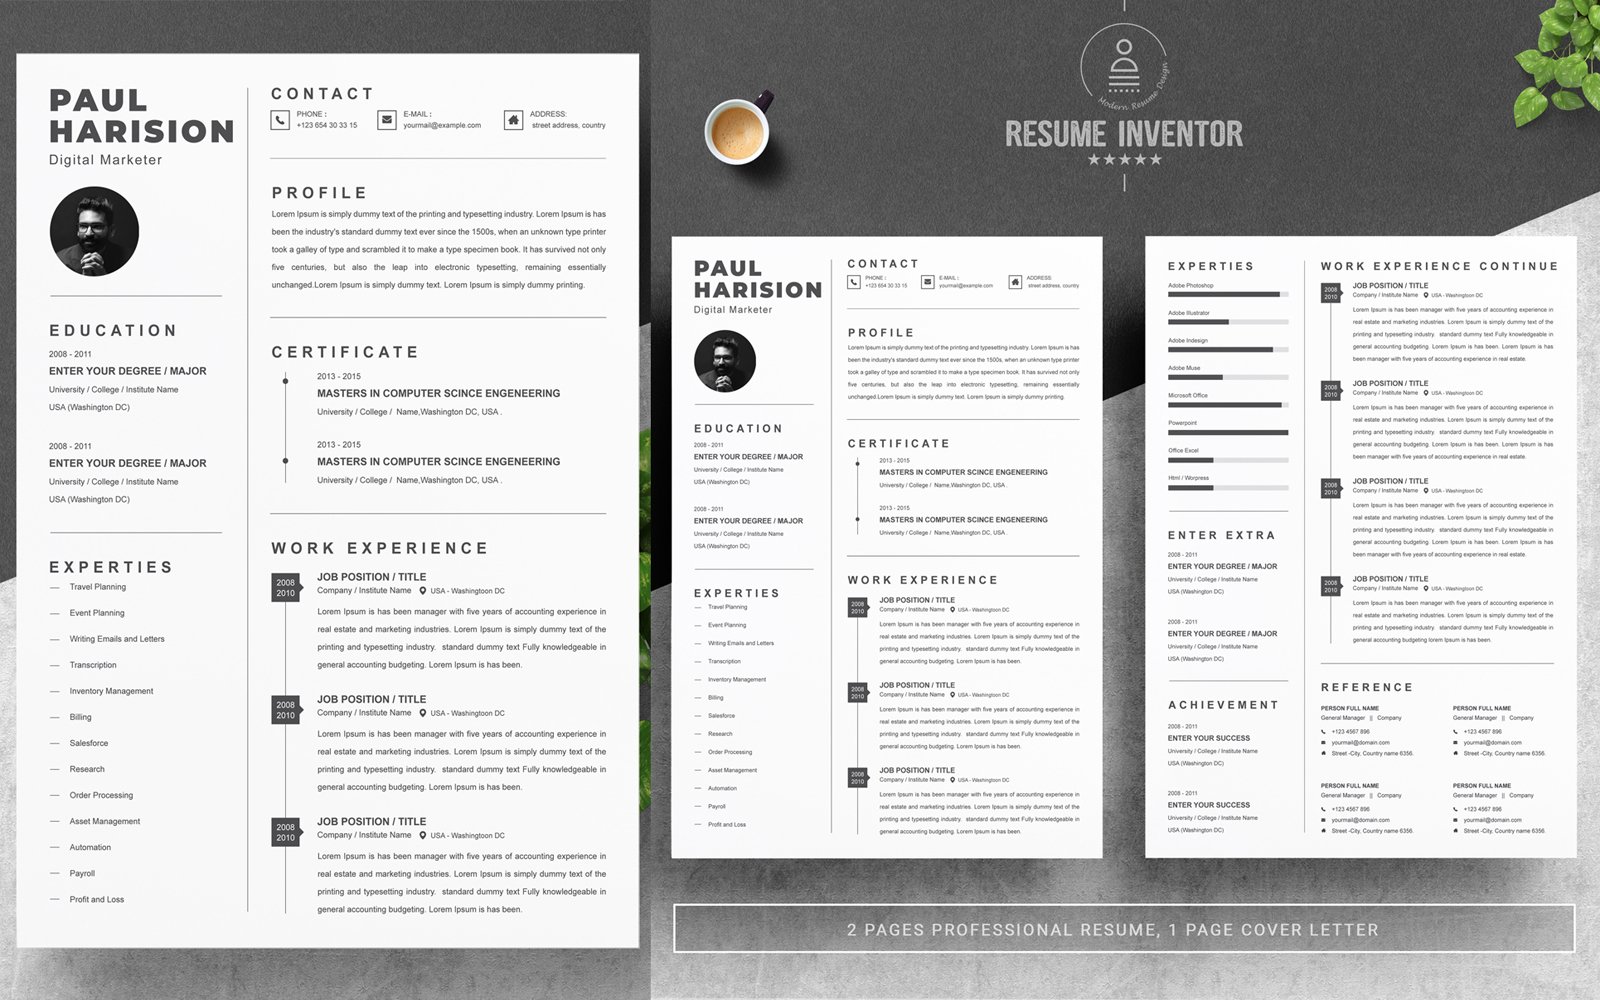 Template #203341 Resume Template Webdesign Template - Logo template Preview